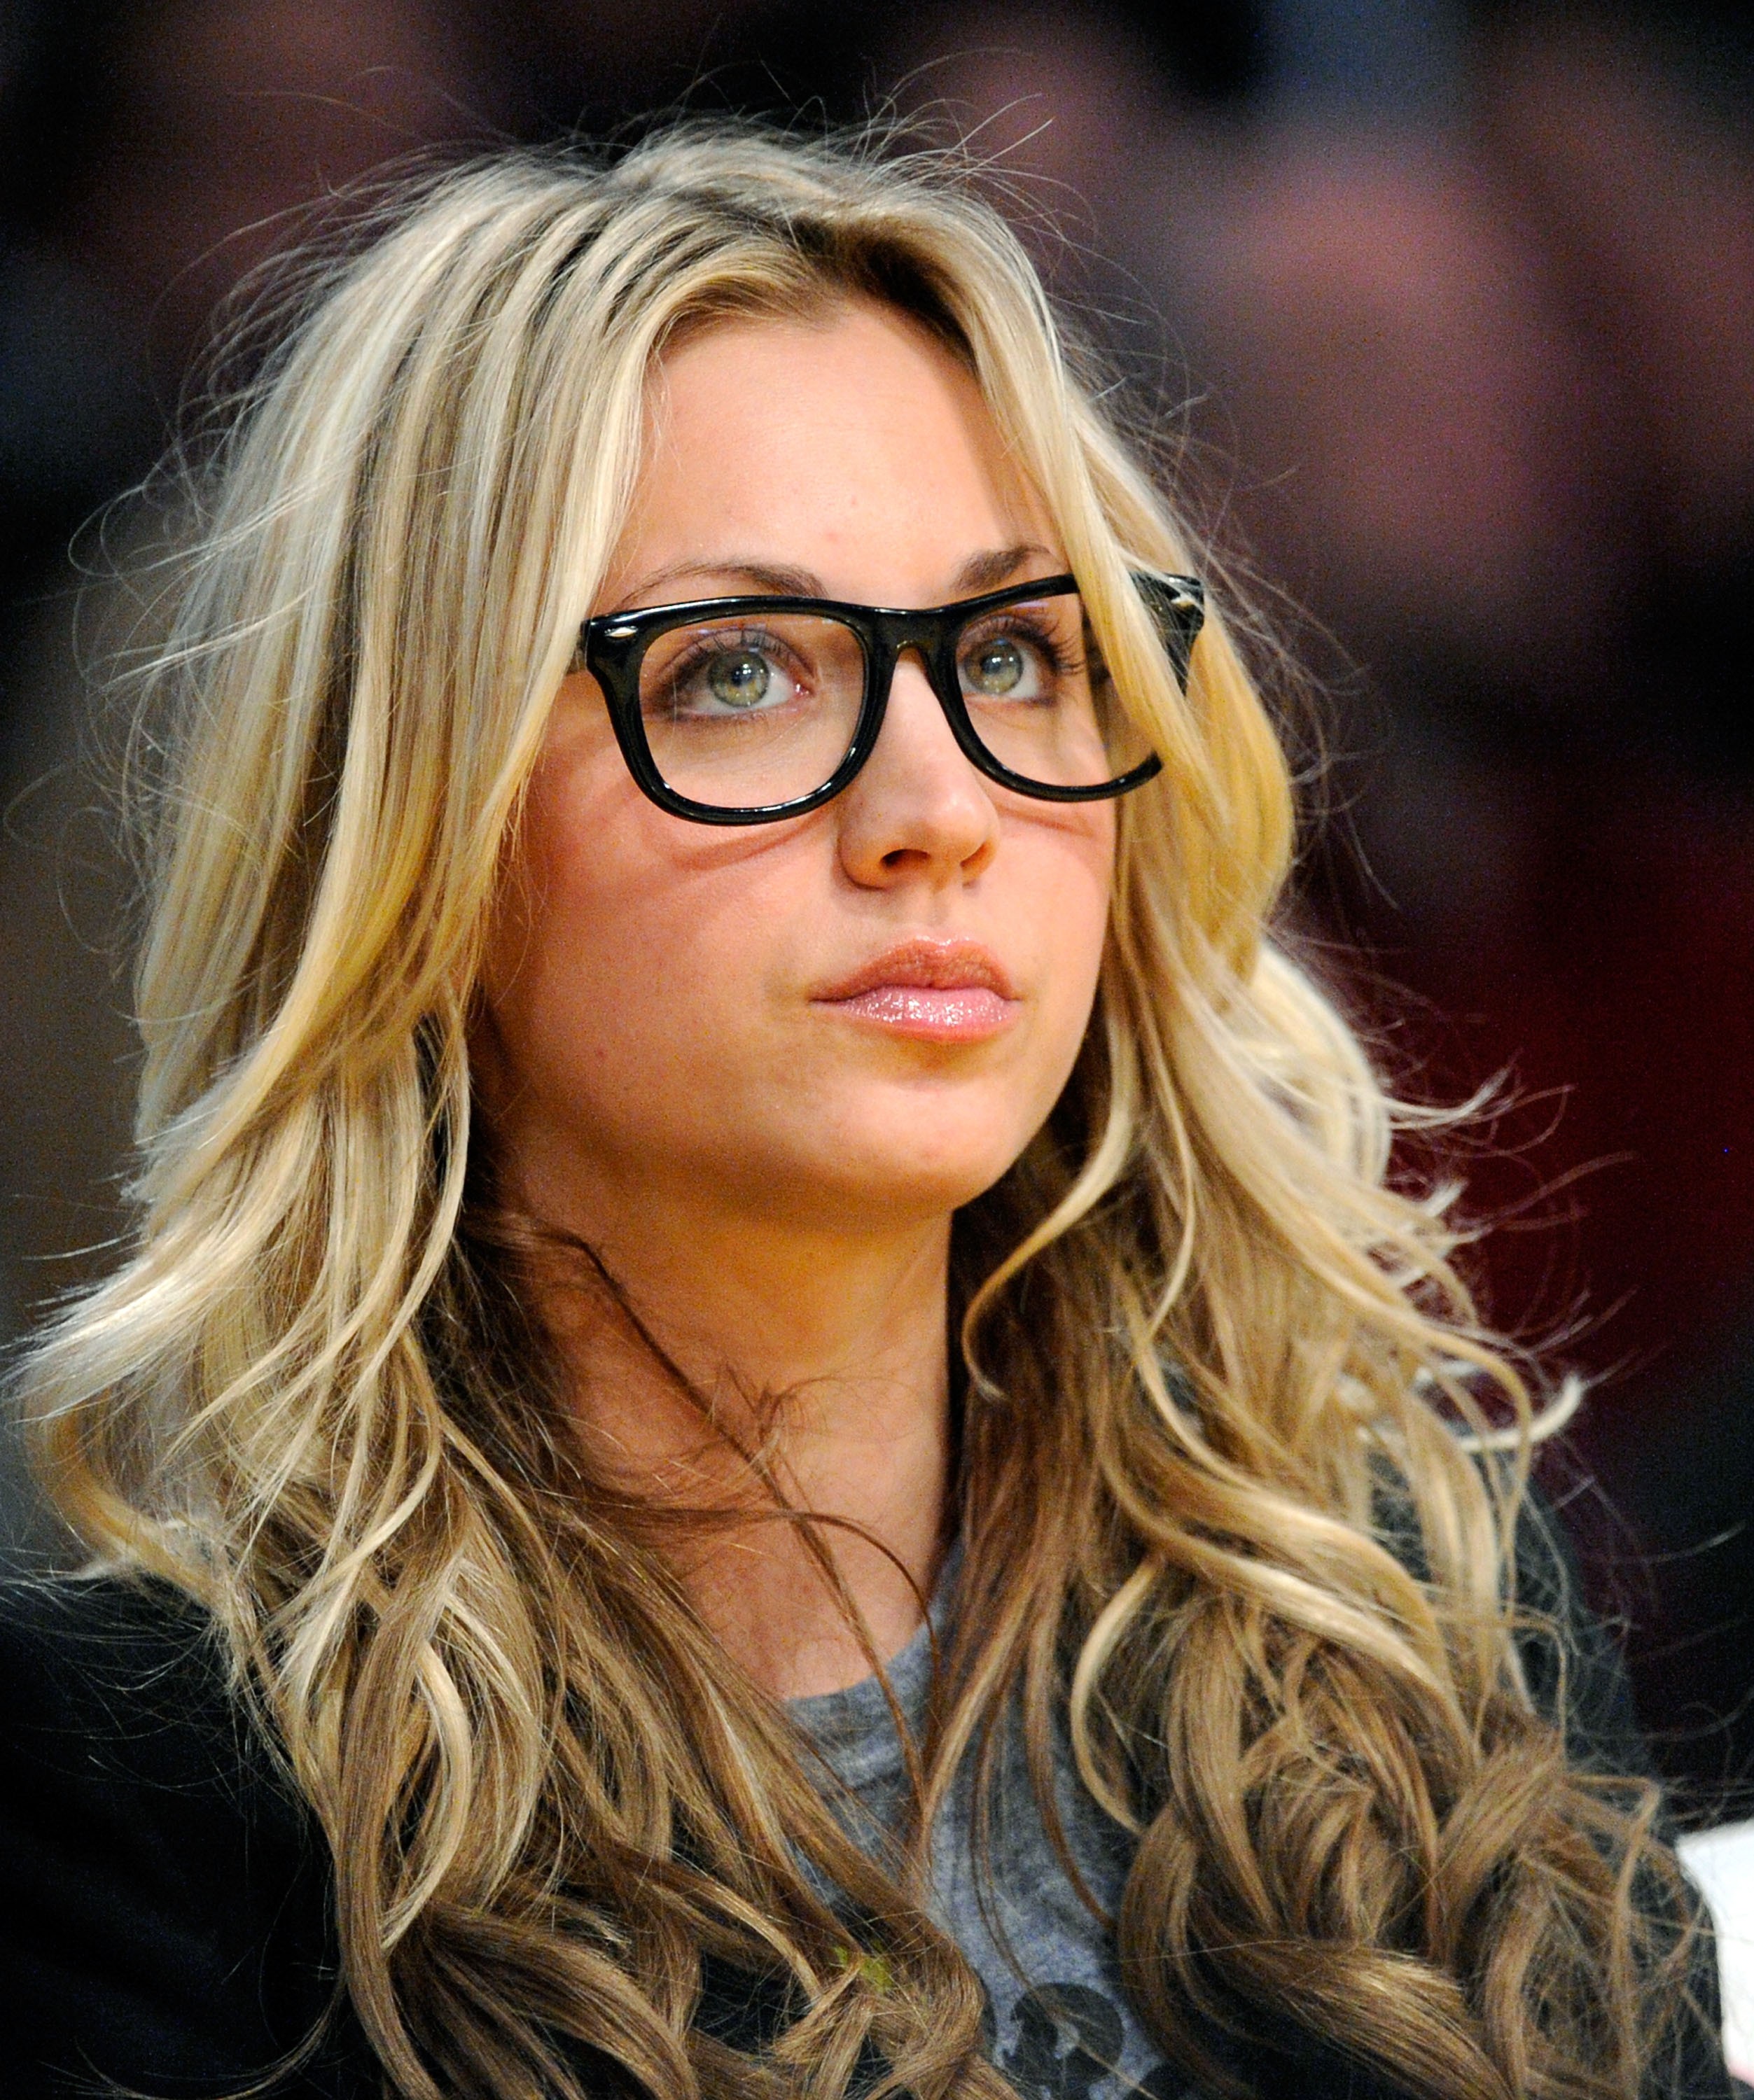 Kaley Cuoco Women Actress Blonde Long Hair Curly Hair Women With Glasses Focused Face 2505x3000